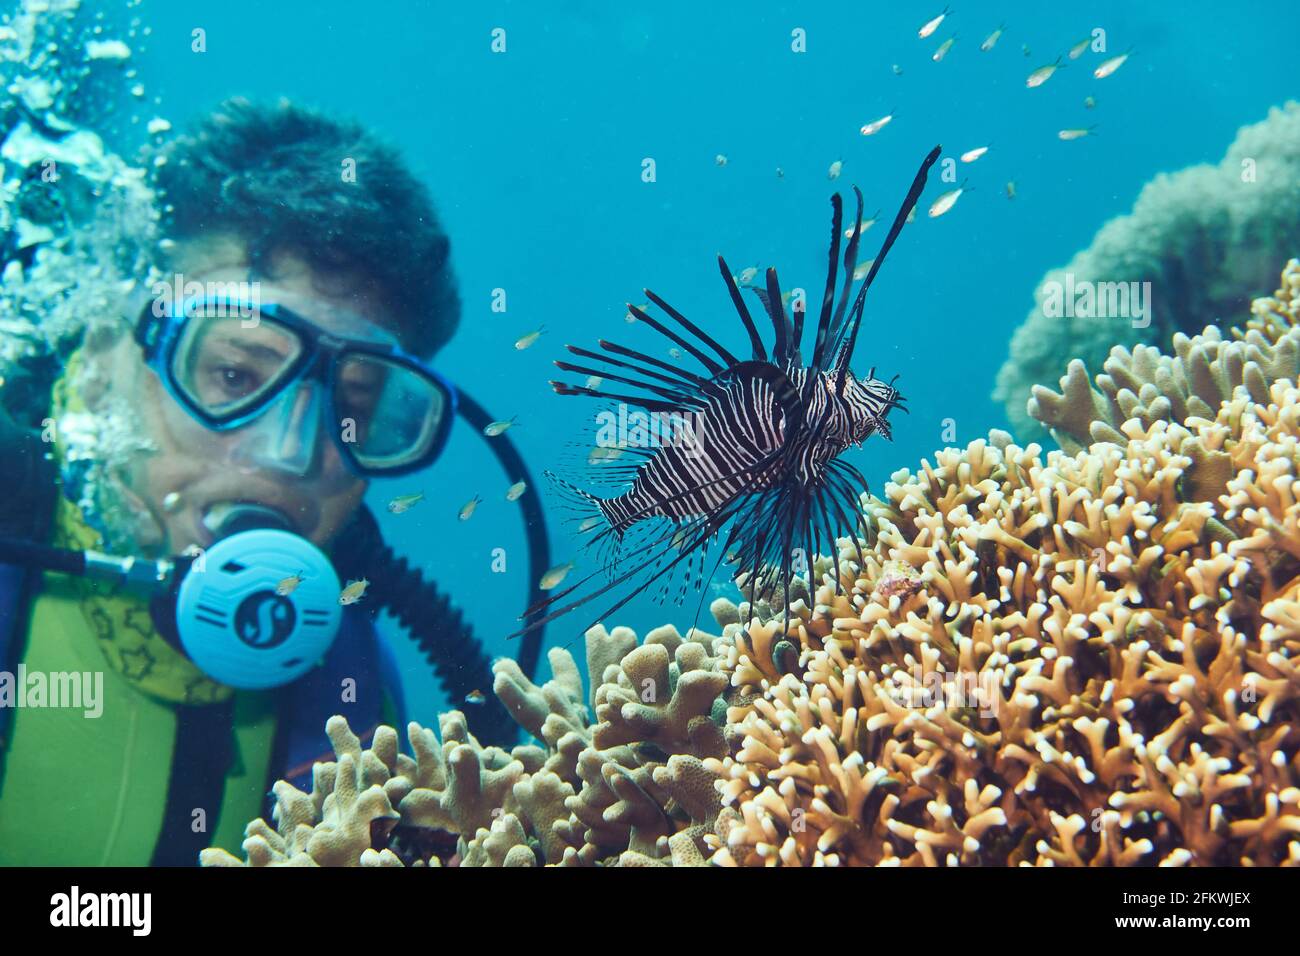 Female Diver Observes A Pacific Lionfish Hunting In The Coral Reef. Selayar, South Sulawesi, Indonesia Stock Photo